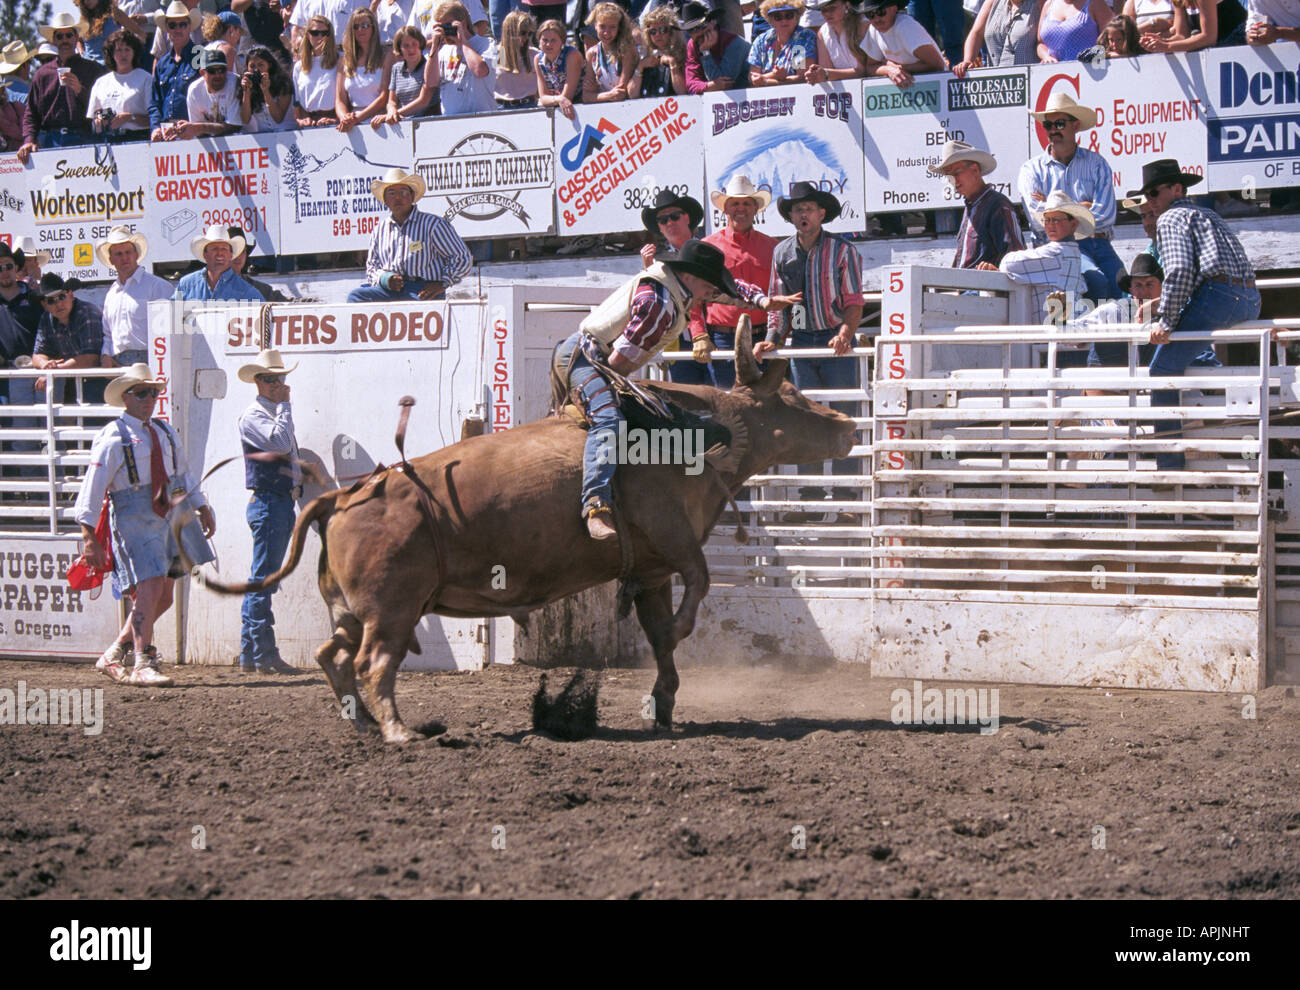 A rodeo cowboy rides a bull at the famous Sisters Rodeo in Sisters